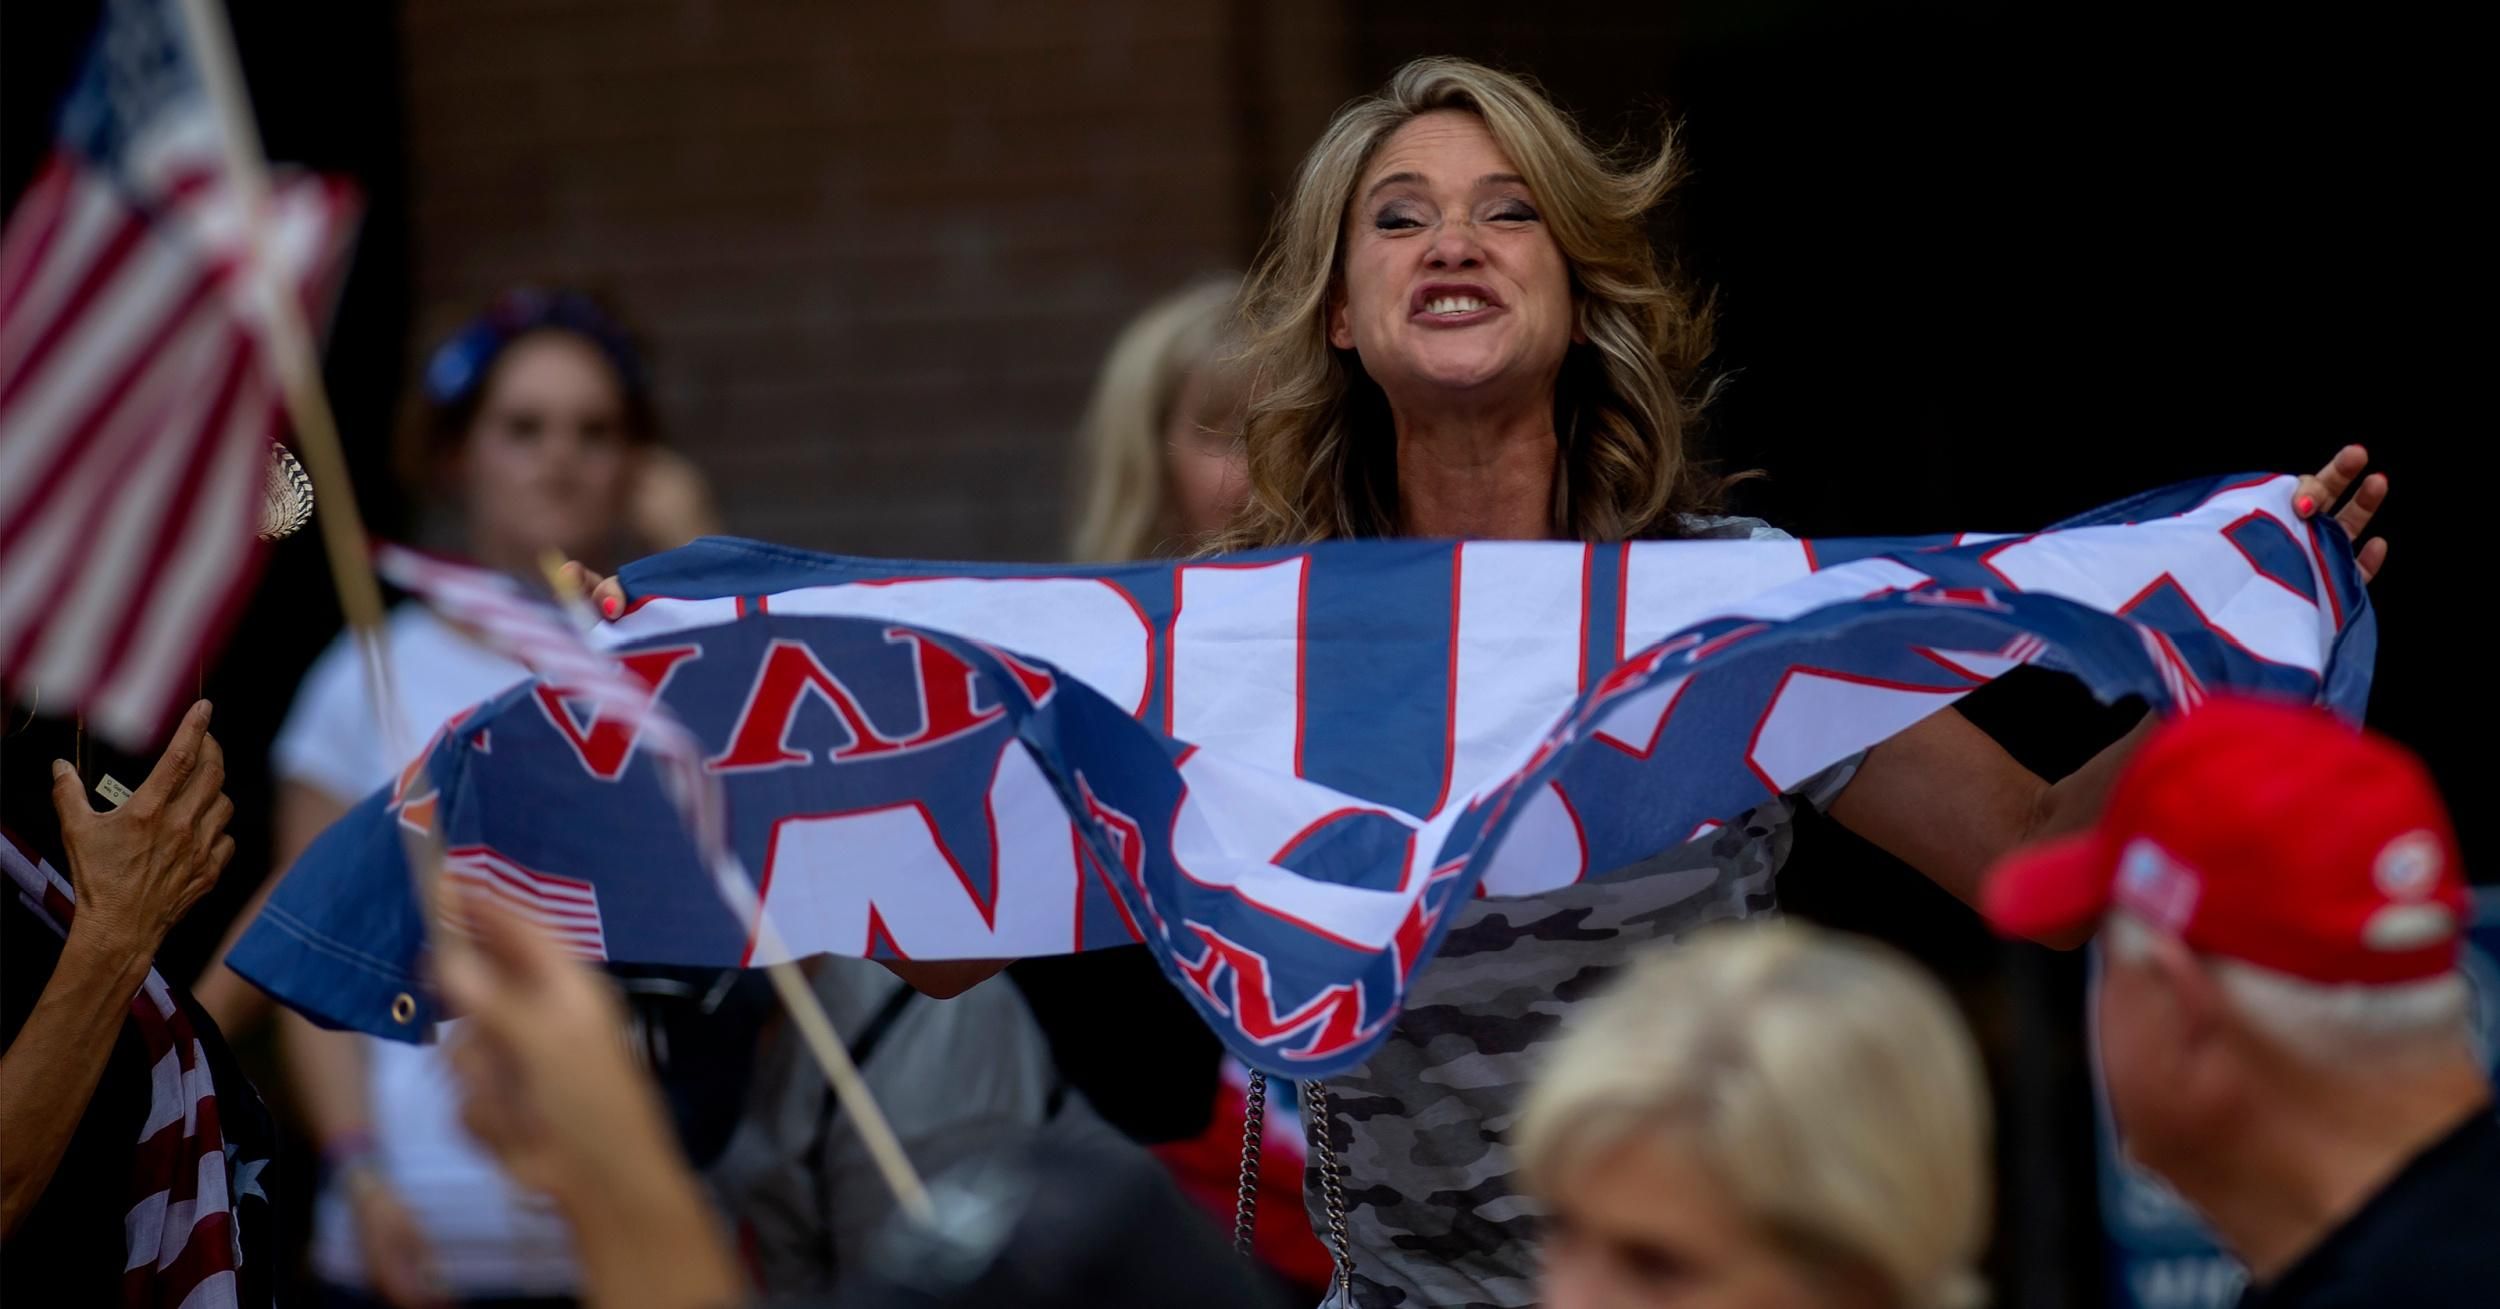 A woman holding a Trump flag reacts to a male driver in a passing car waving a Biden-Harris flag at an America First" rally.